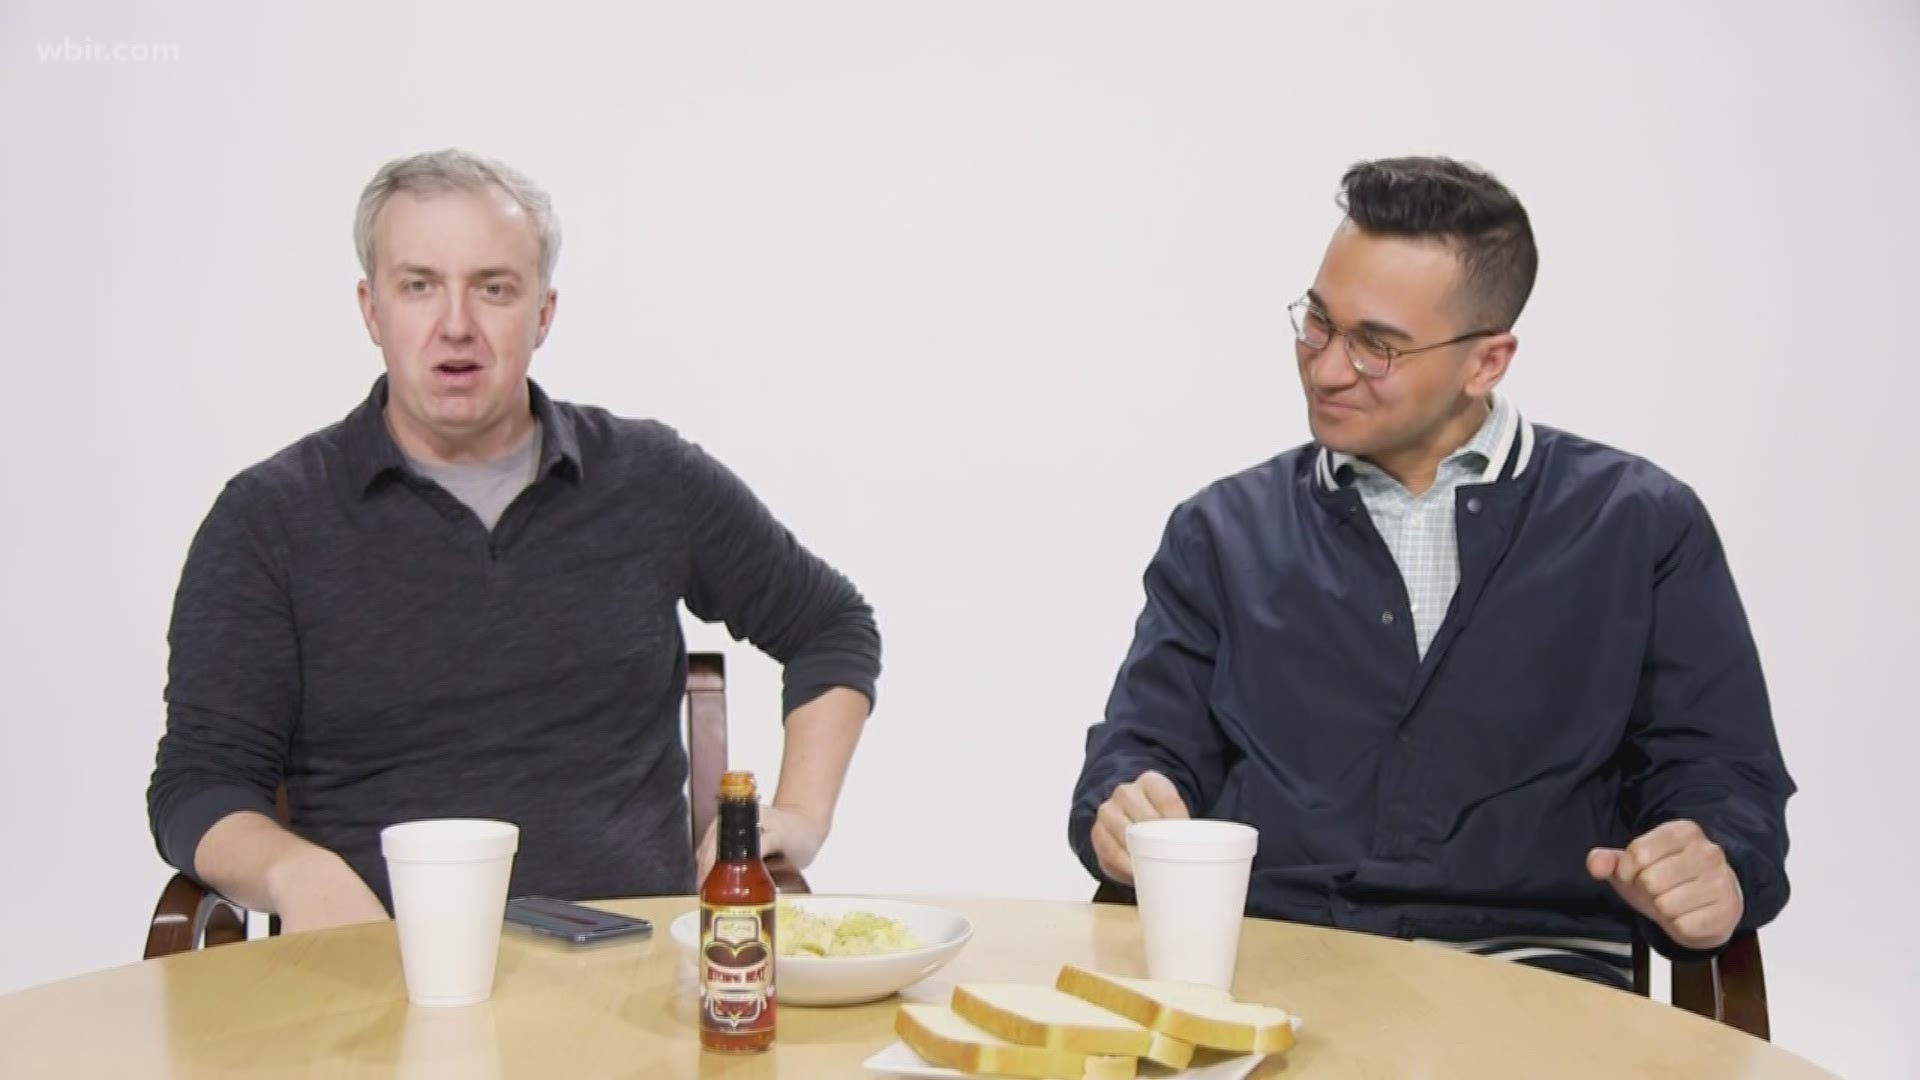 Some of our team decided to go to a local shop and pick up three different hot sauces to try. Here's a look at their fiery taste test.